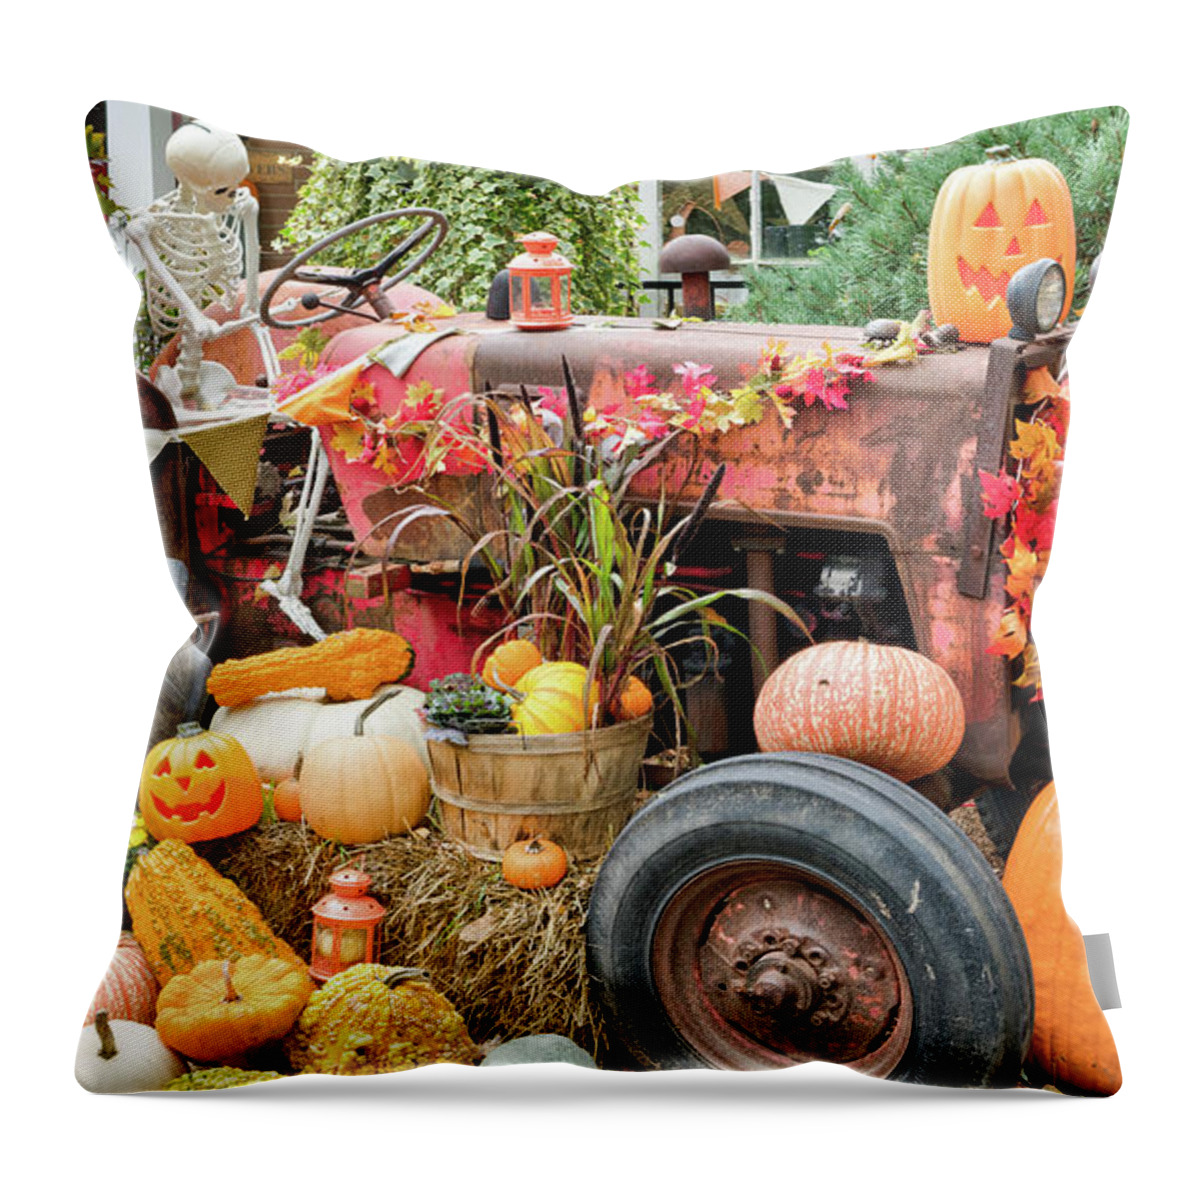 Fall Throw Pillow featuring the photograph Fall Decor by Nick Mares